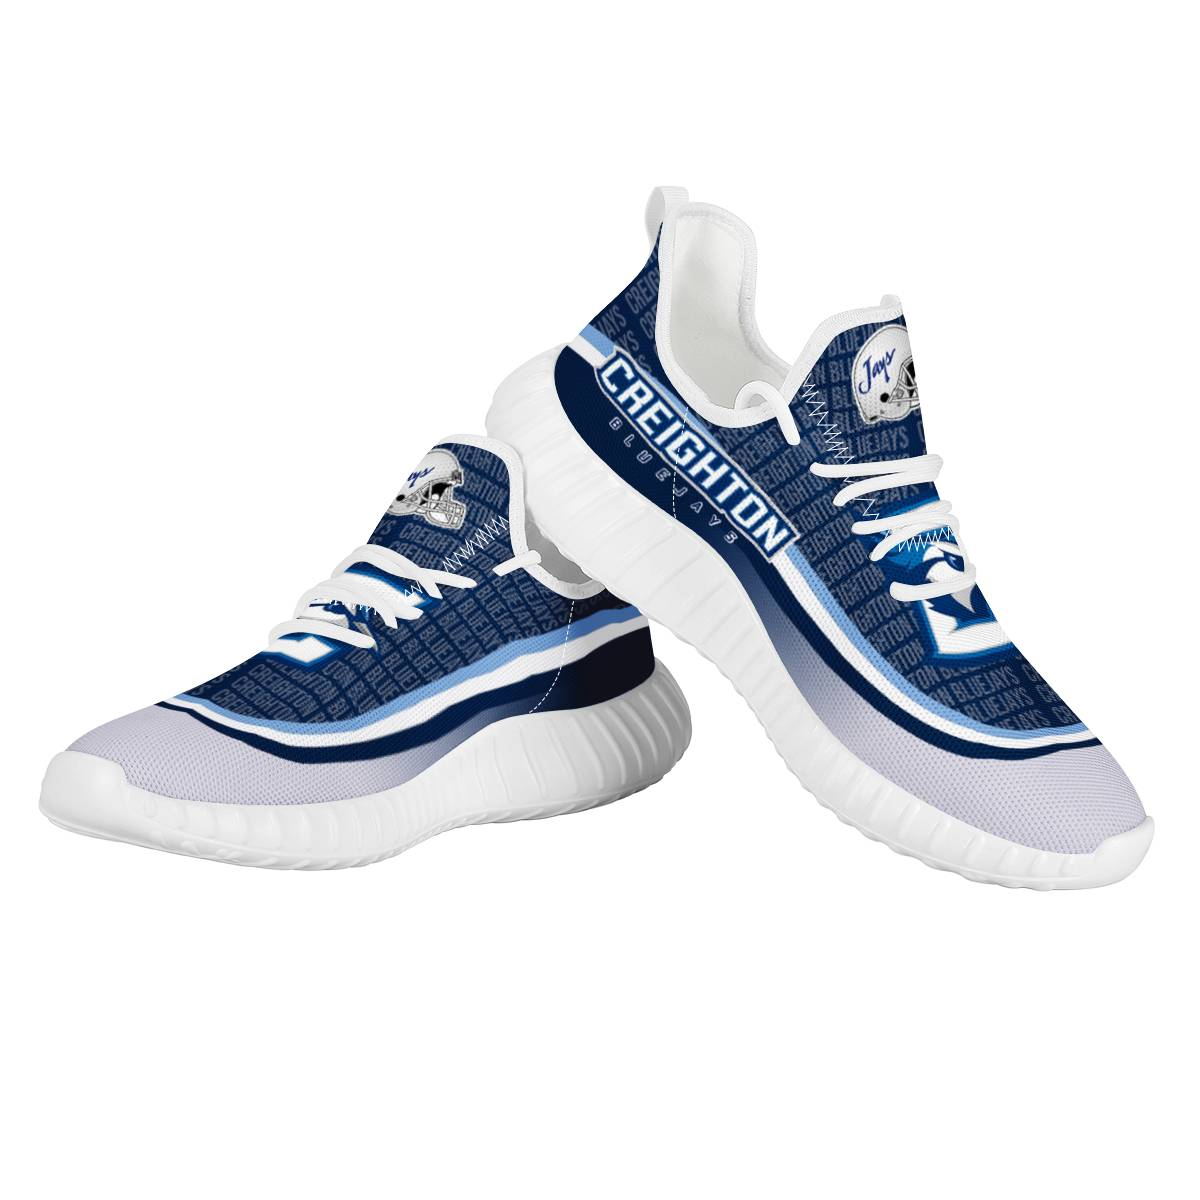 Men's MLB Tampa Bay Rays Mesh Knit Sneakers/Shoes 004